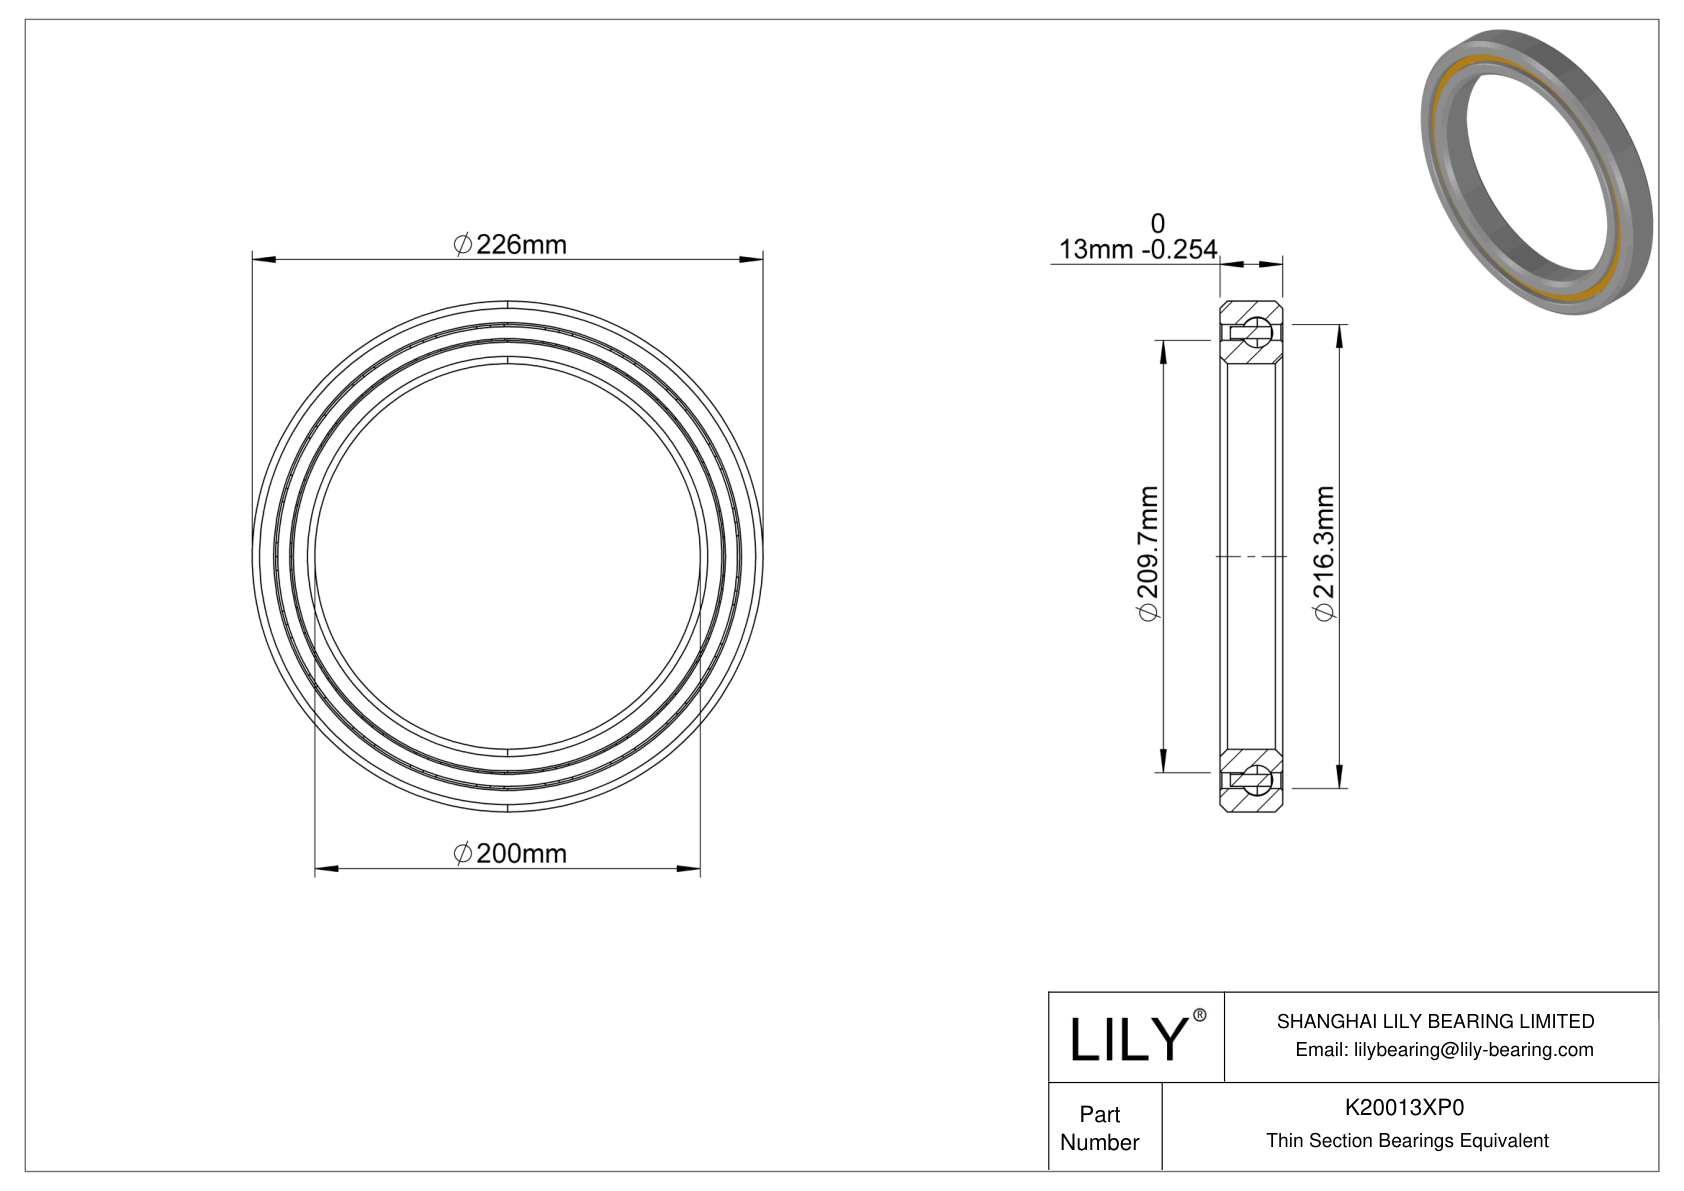 K20013XP0 Constant Section (CS) Bearings cad drawing